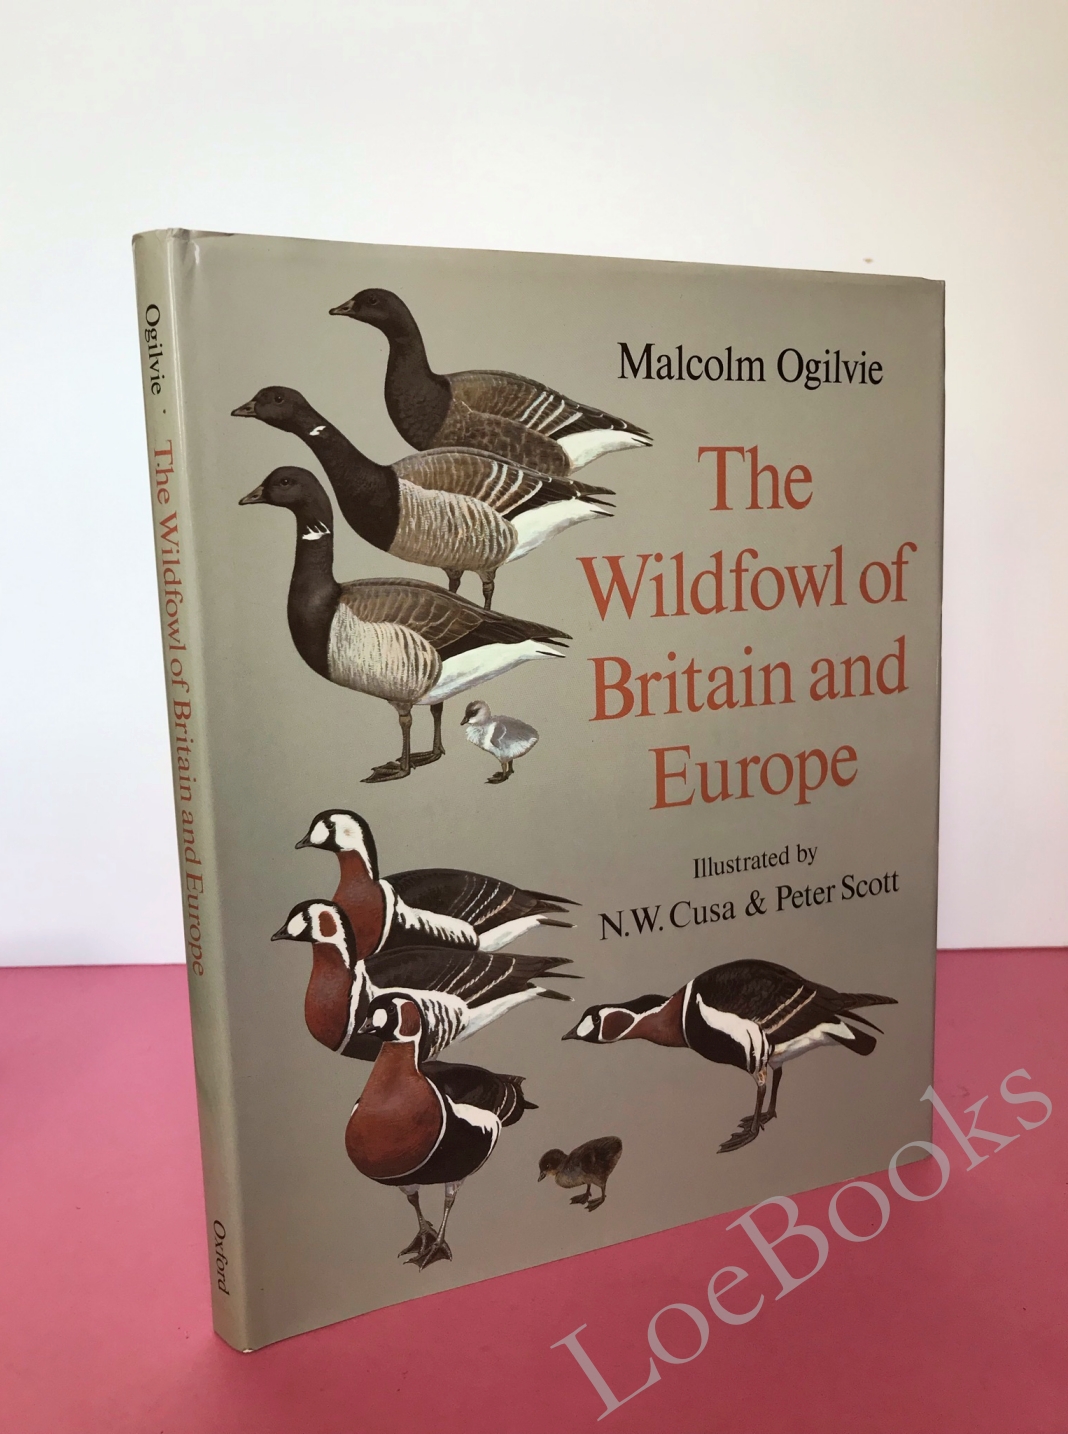 WILDFOWL OF BRITAIN AND EUROPE [Signed By the author] - Ogilvie, Malcolm